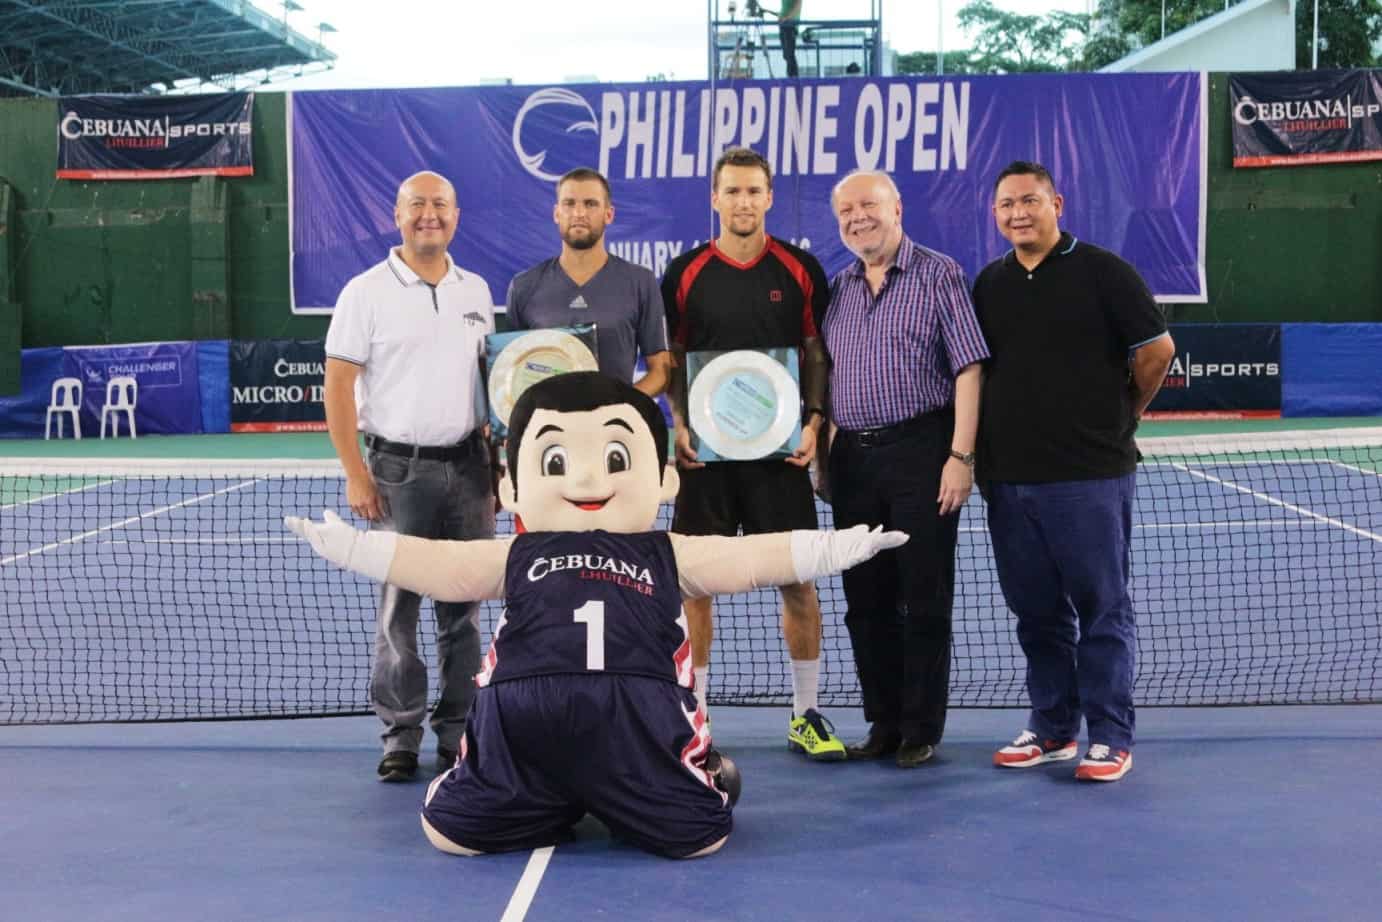 Lhuillier sees great promise in PH tennis